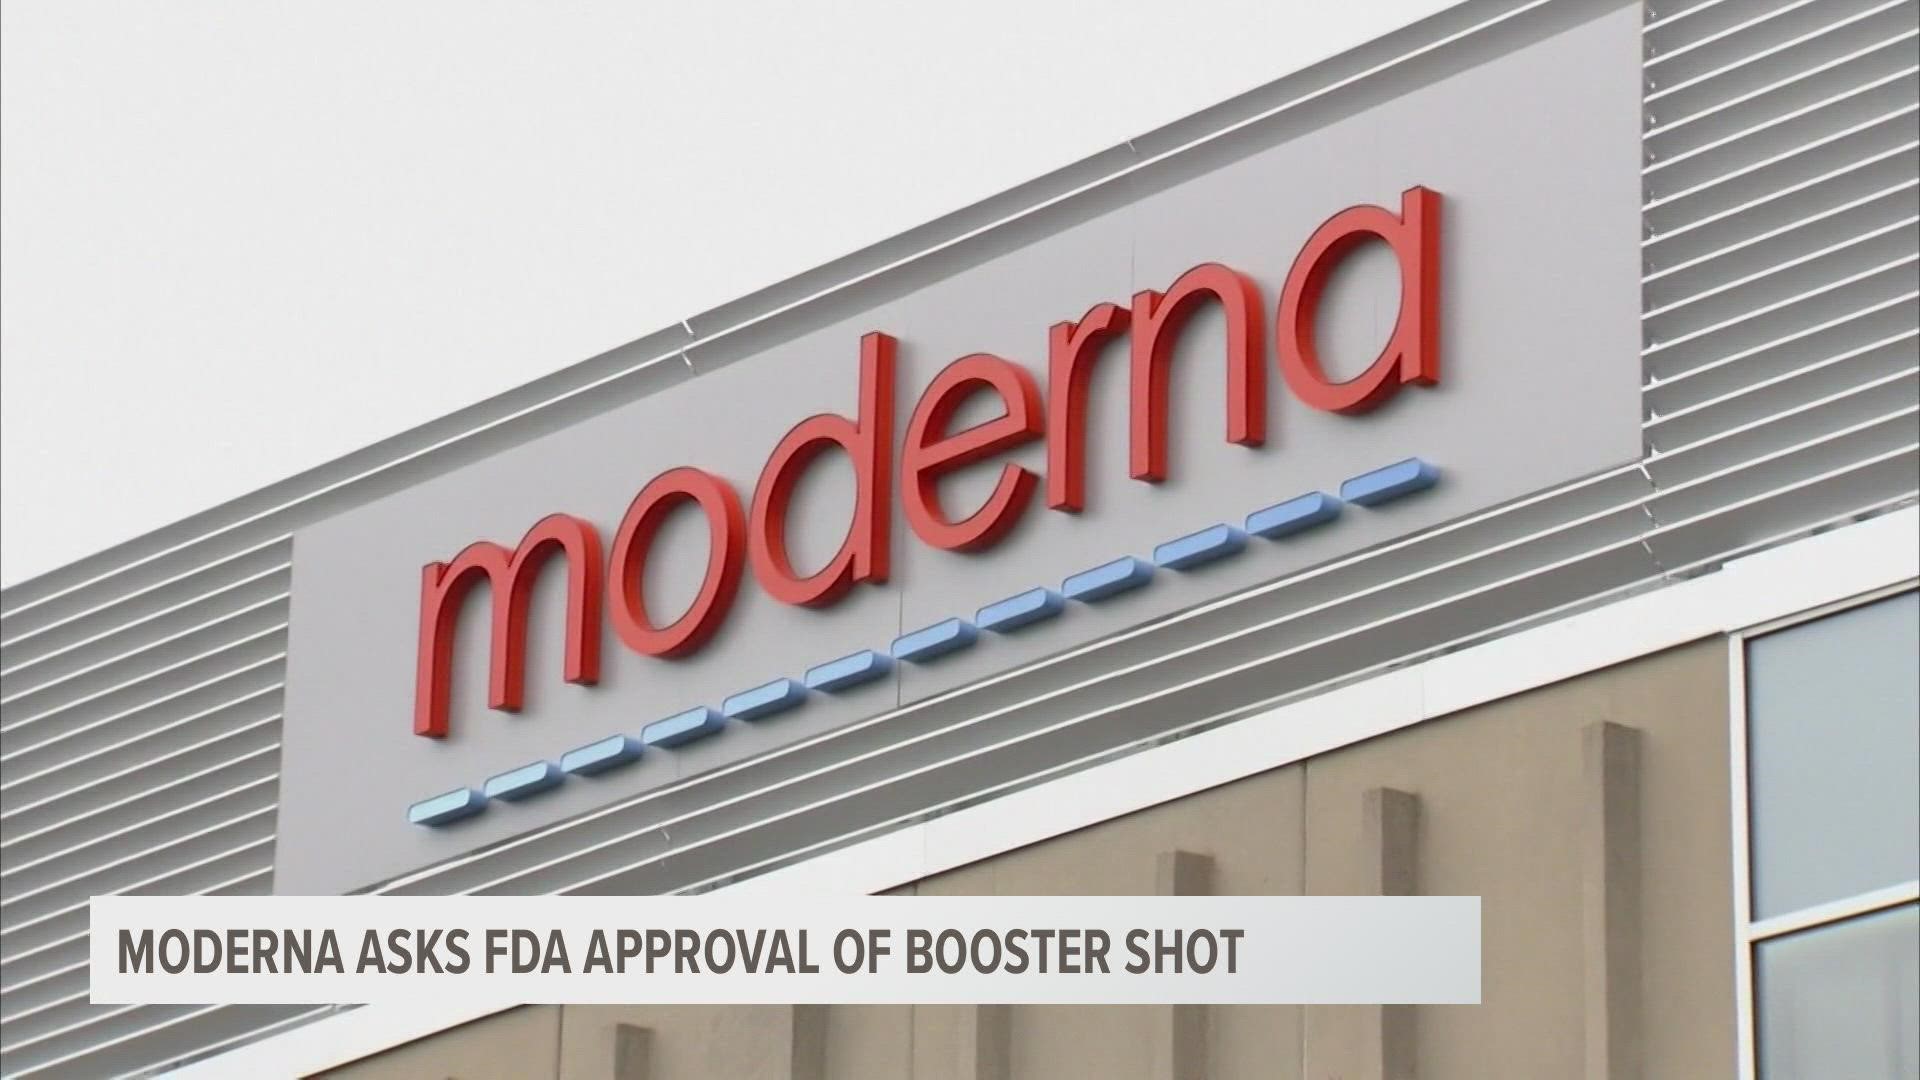 Moderna made the broad request for the additional booster to be approved for everyone 18 and older while Pfizer only requested the additional booster for seniors.